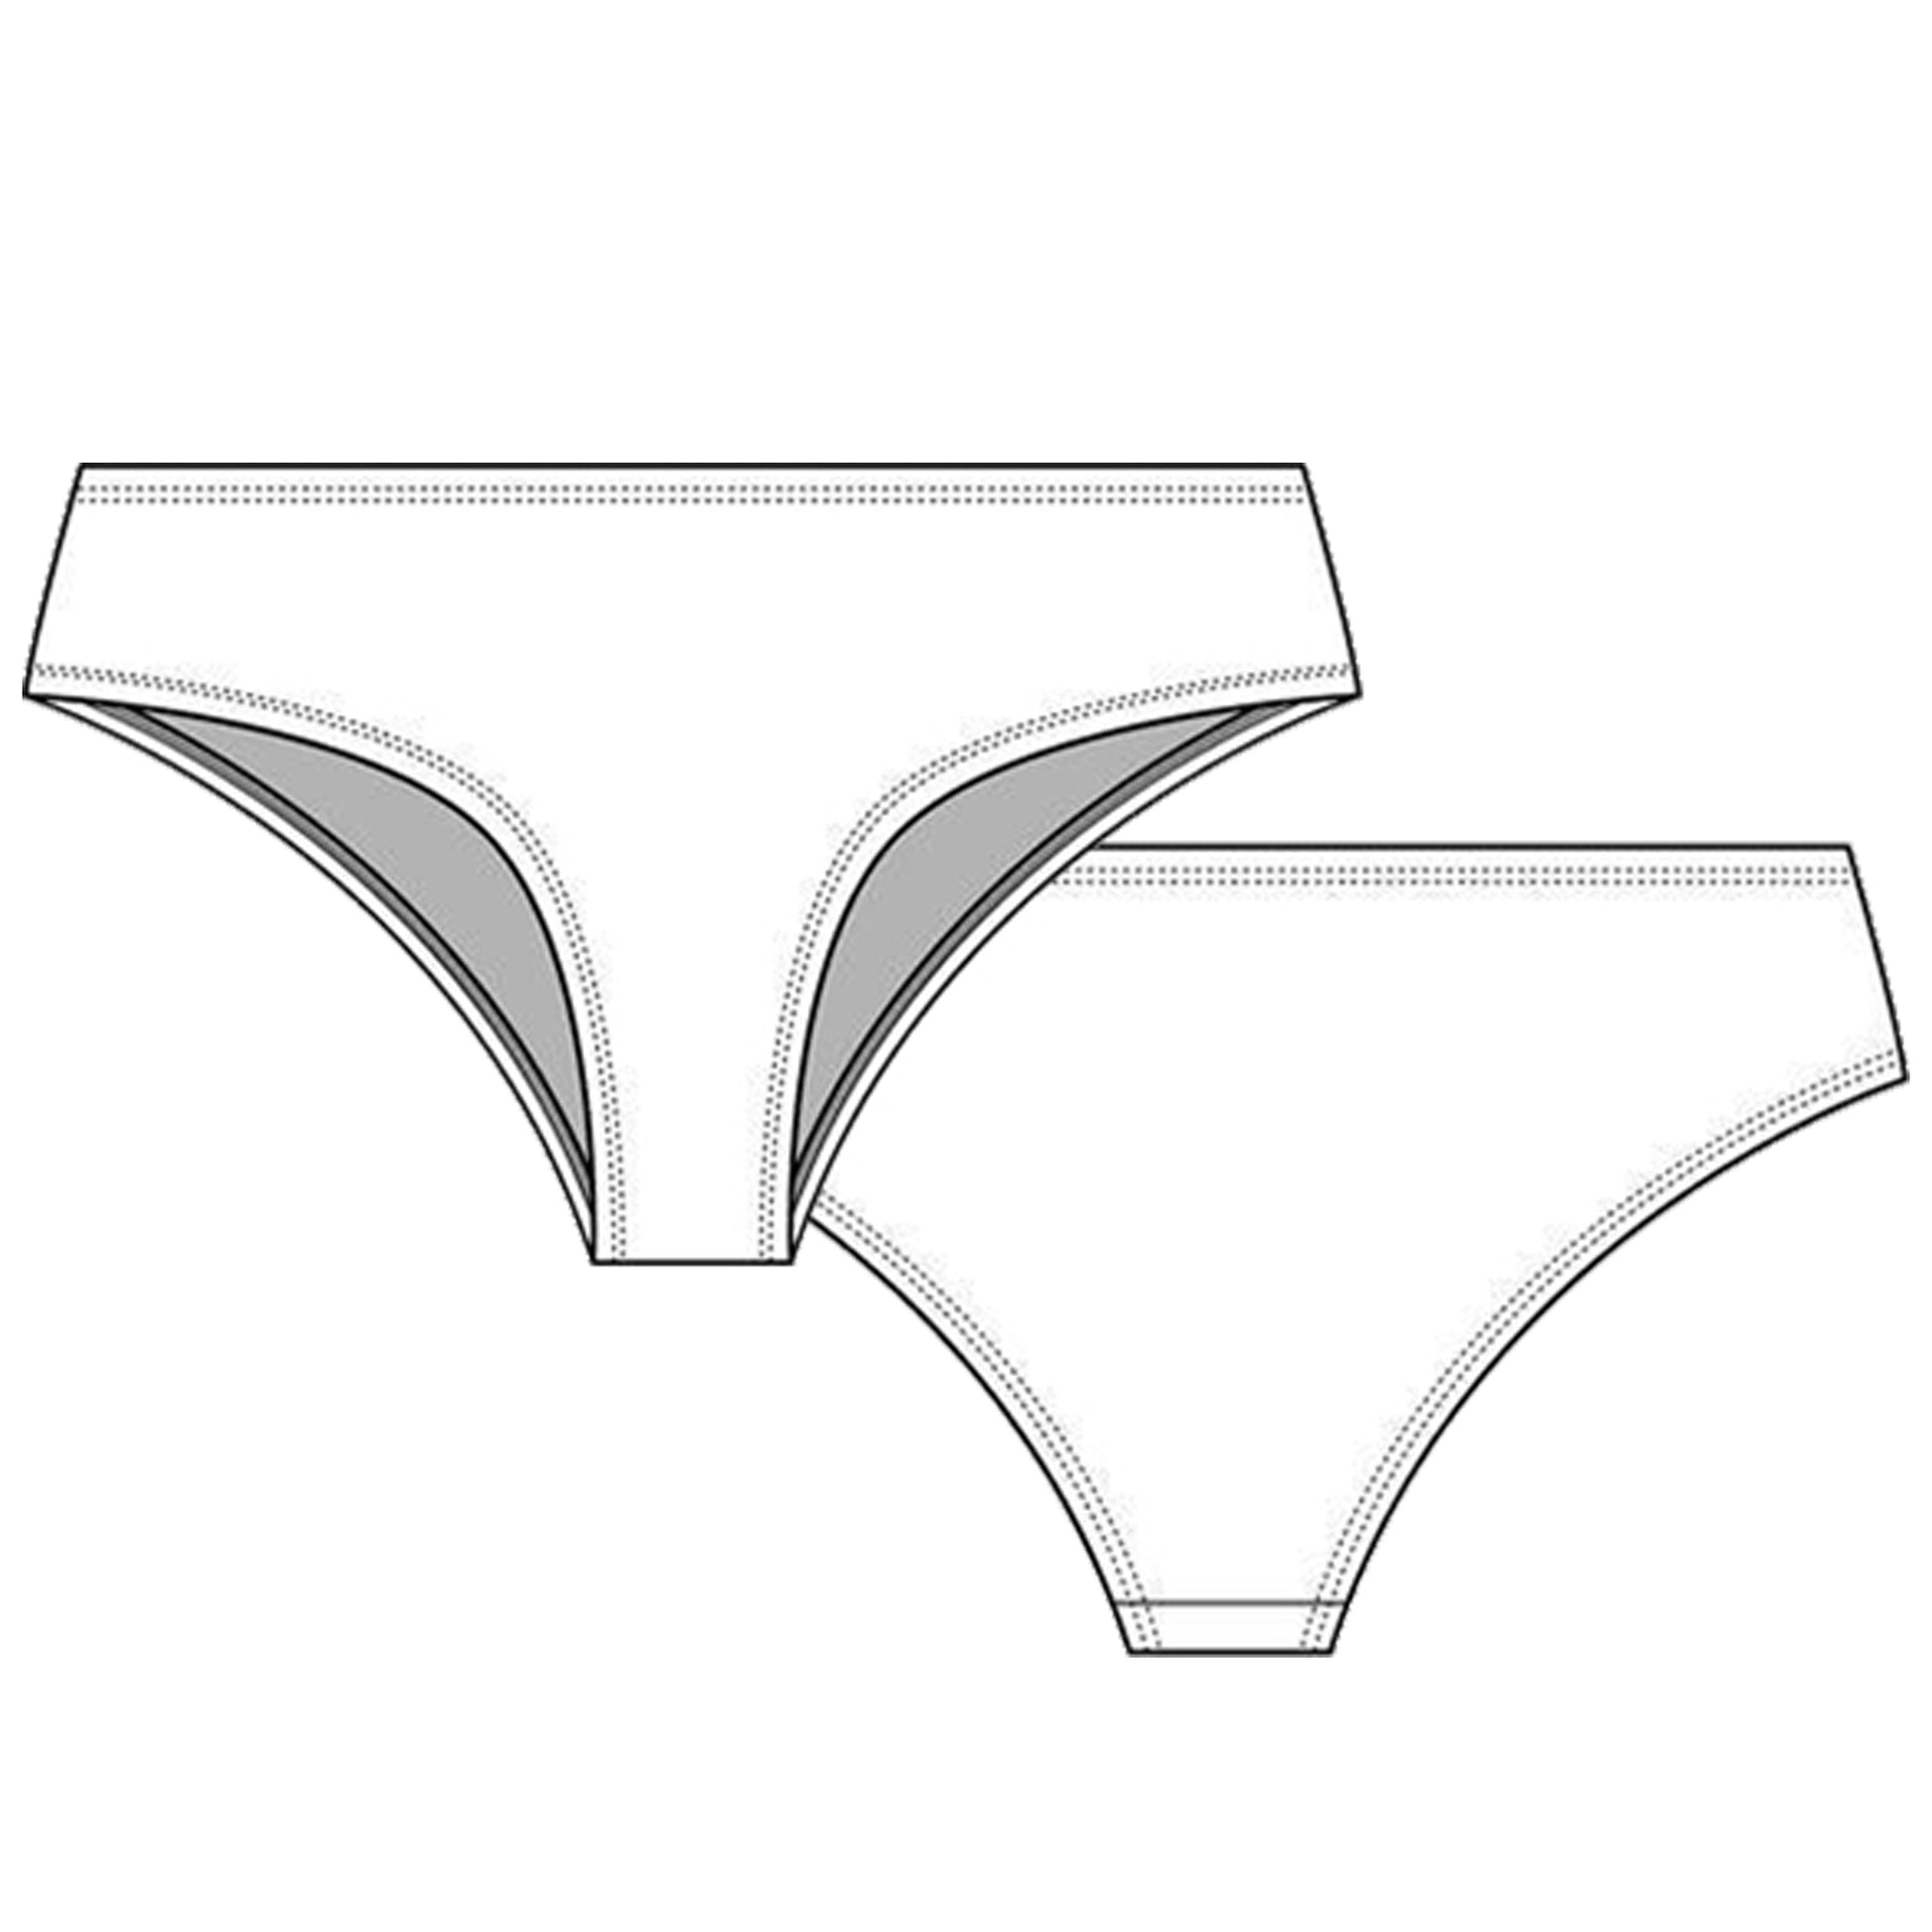 https://tizzandtonic.com/cdn/shop/files/The_cHEEKY_Panty_Organic_Cotton_Technical_Front_and_Back_Made_in_Europe_Details_4e087384-c3d7-4dd8-865f-64b81f59f7ca.jpg?v=1709212580&width=1946